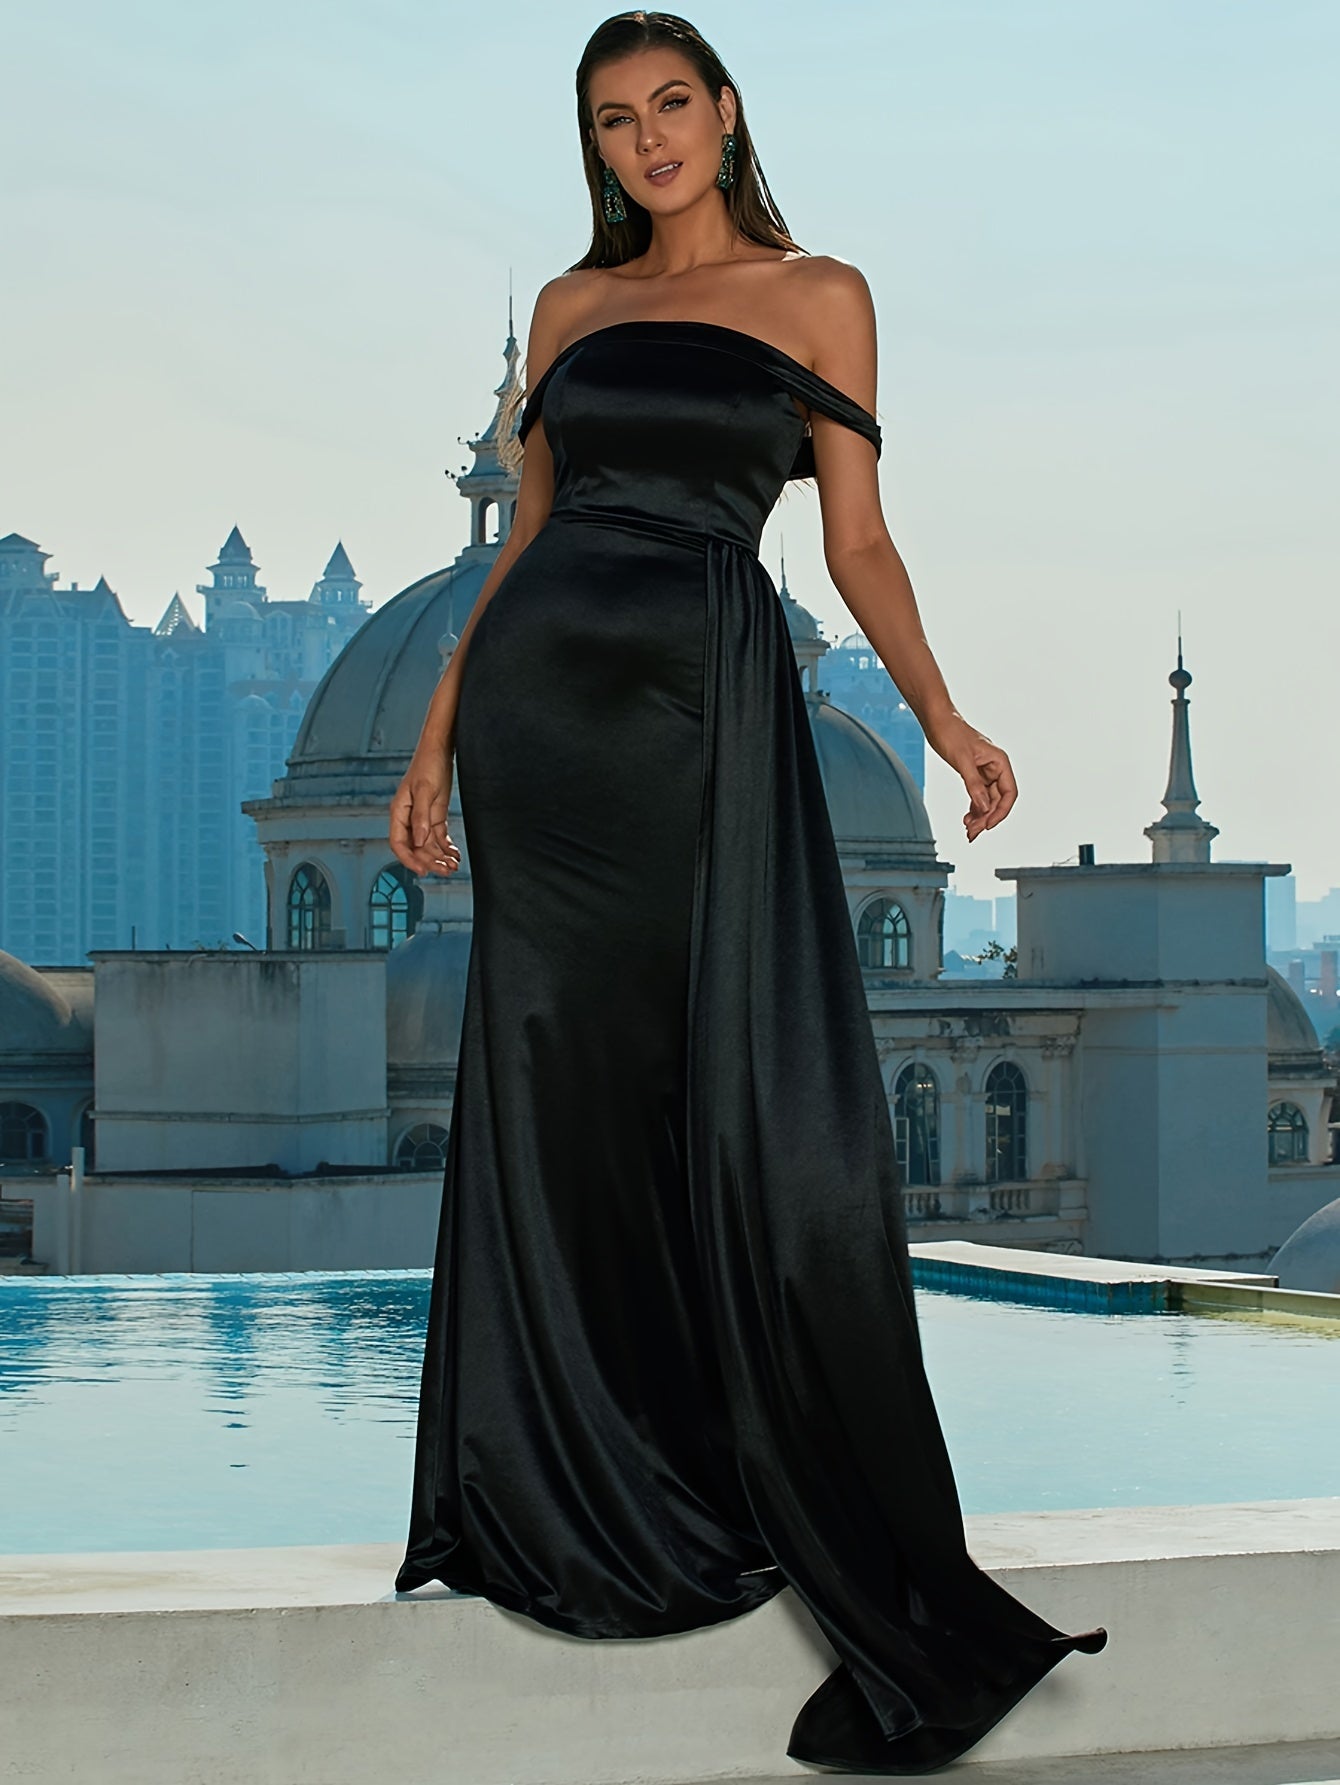 Solid-Colored Off Shoulder Dress - Exquisitely Elegant with Daring Backless Design, Beautifully Ruched Details, Flattering Slim-Fit Silhouette, and Flowing Floor-Length Hem - Perfect for Bridesmaids and Formal Occasions, Womens Formal Wear